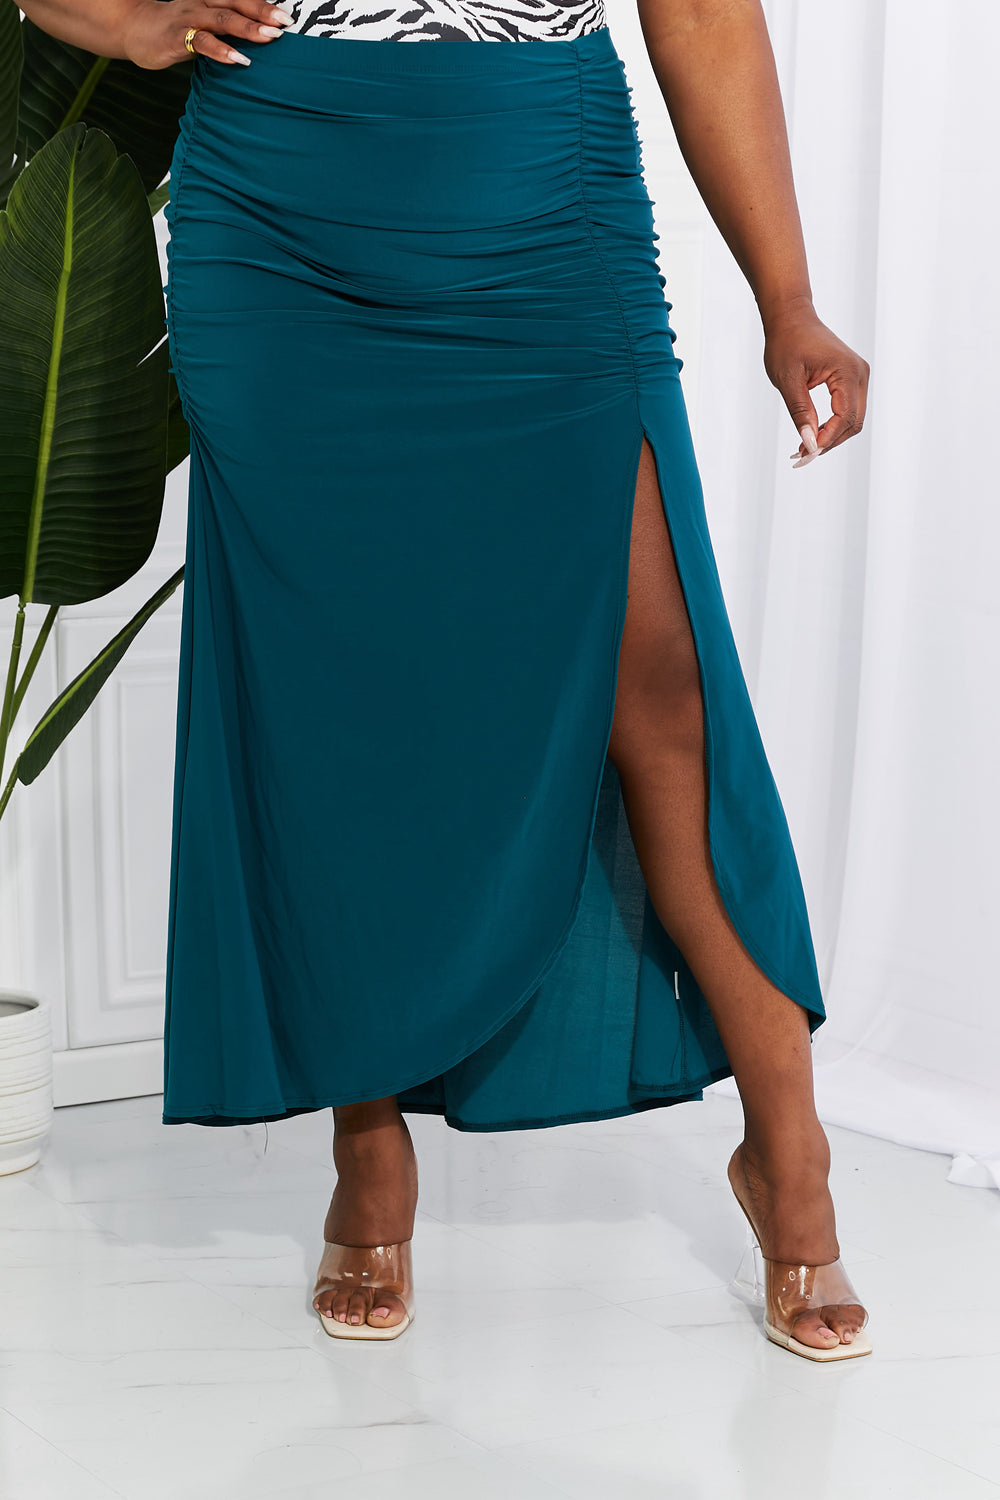 White Birch Up and Up Ruched Slit Maxi Skirt in Teal White Birch